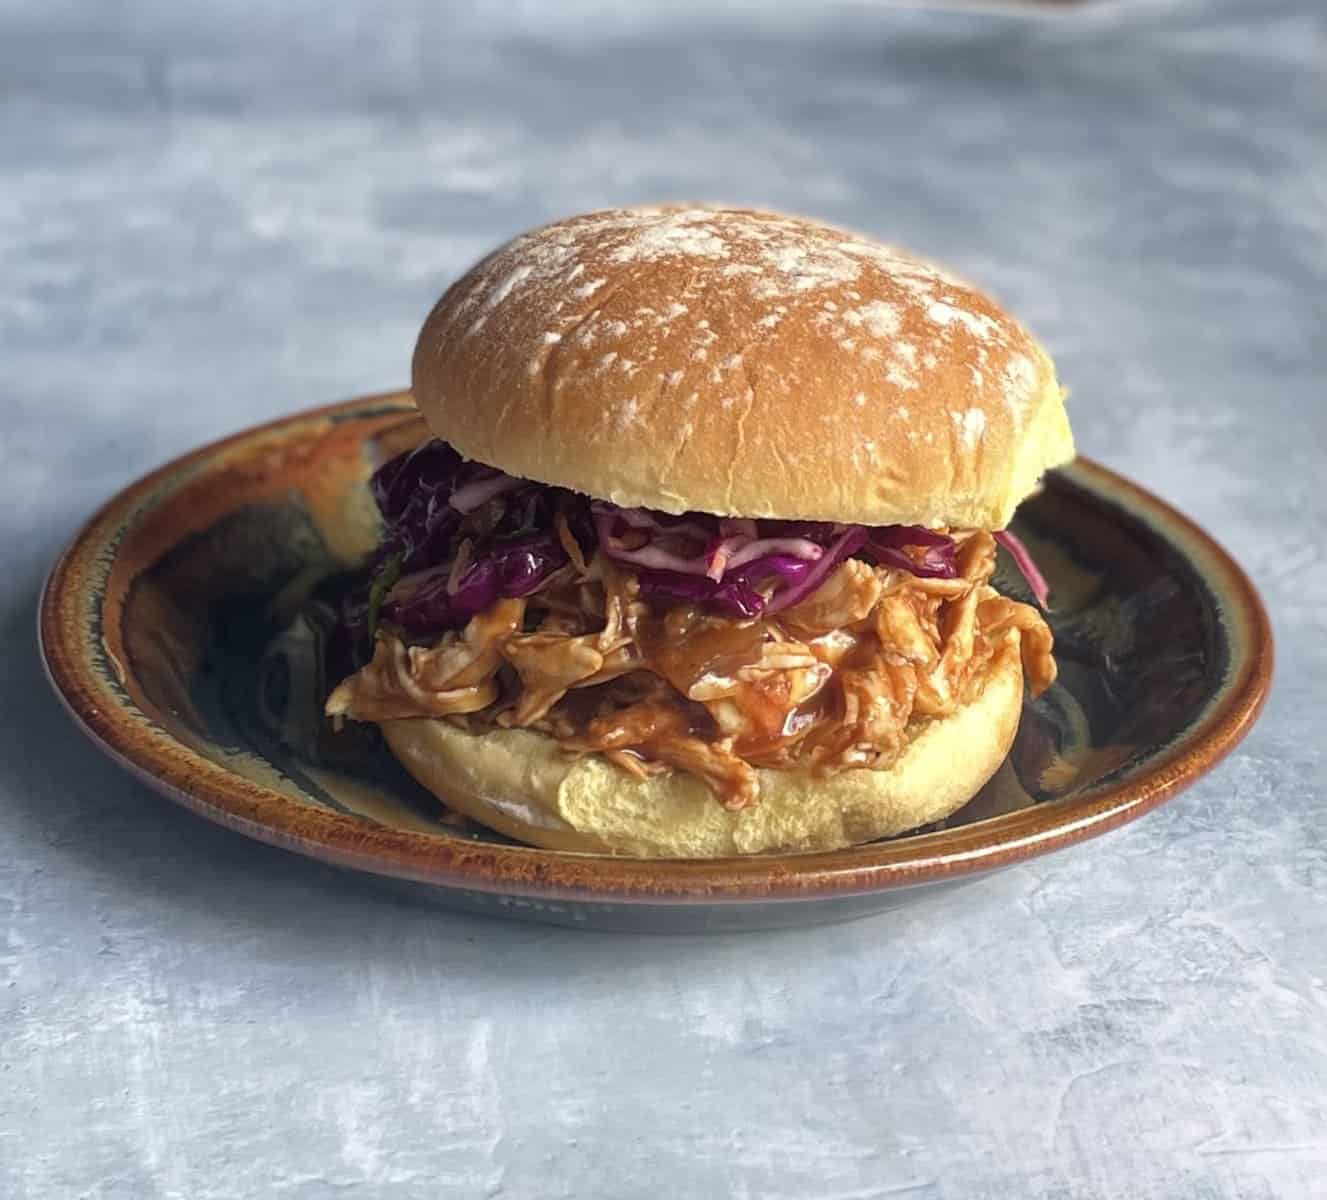 BBQ pulled chicken sandwich with shredded chicken and purple cabbage slaw on a bun on a plate.